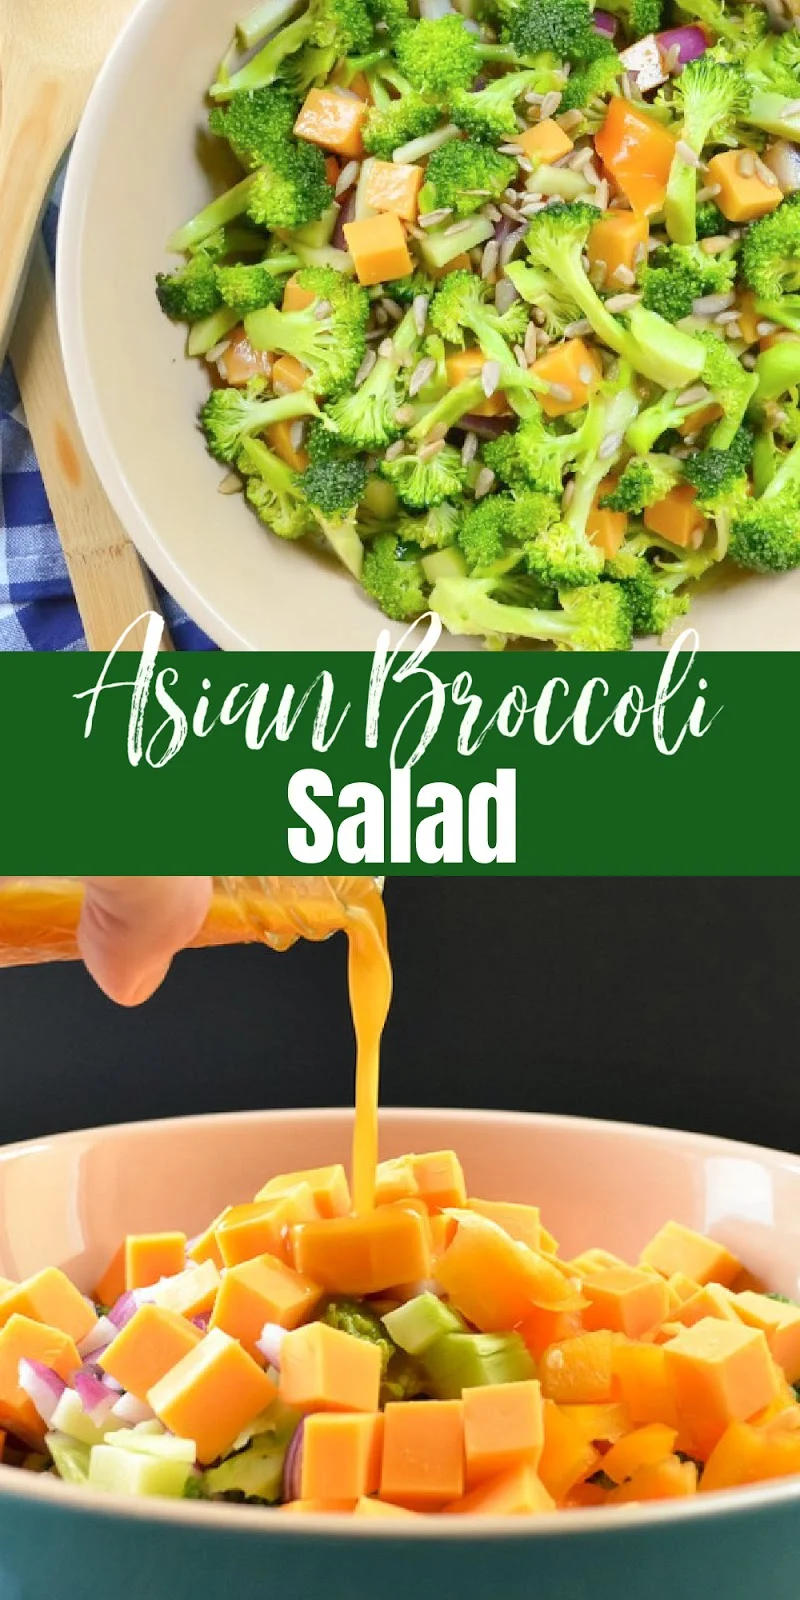 Asian Broccoli Salad with Cheese and a Sesame Dressing.